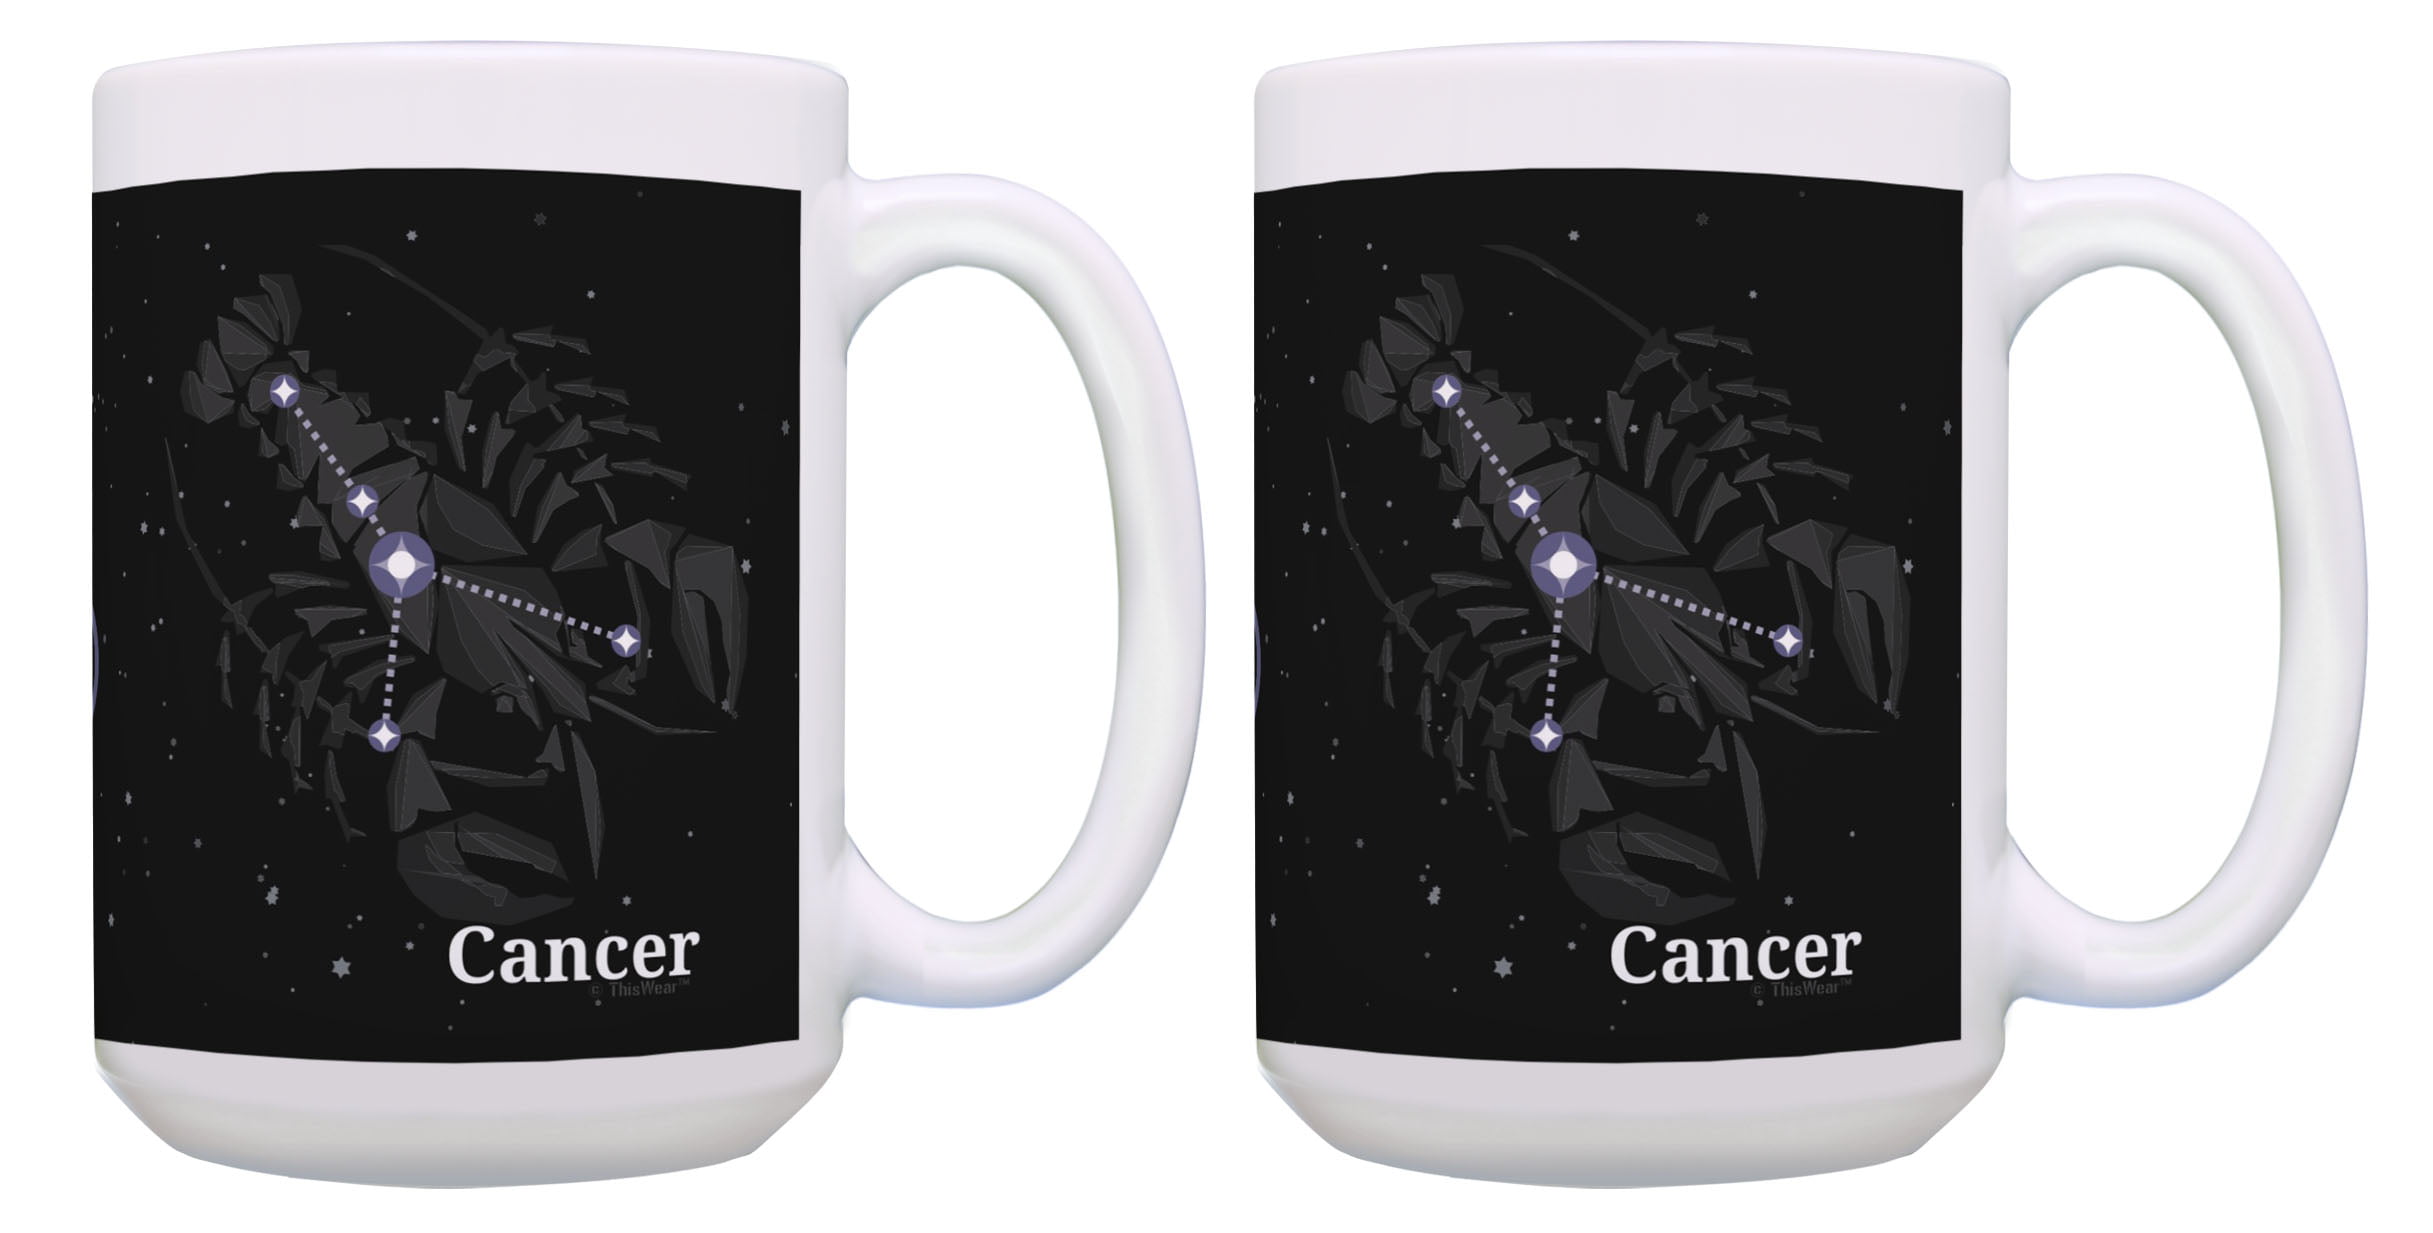 coffee or tea cup for star sign gift stars star seeds moon Cancer zodiac sign constellation Mug 11oz